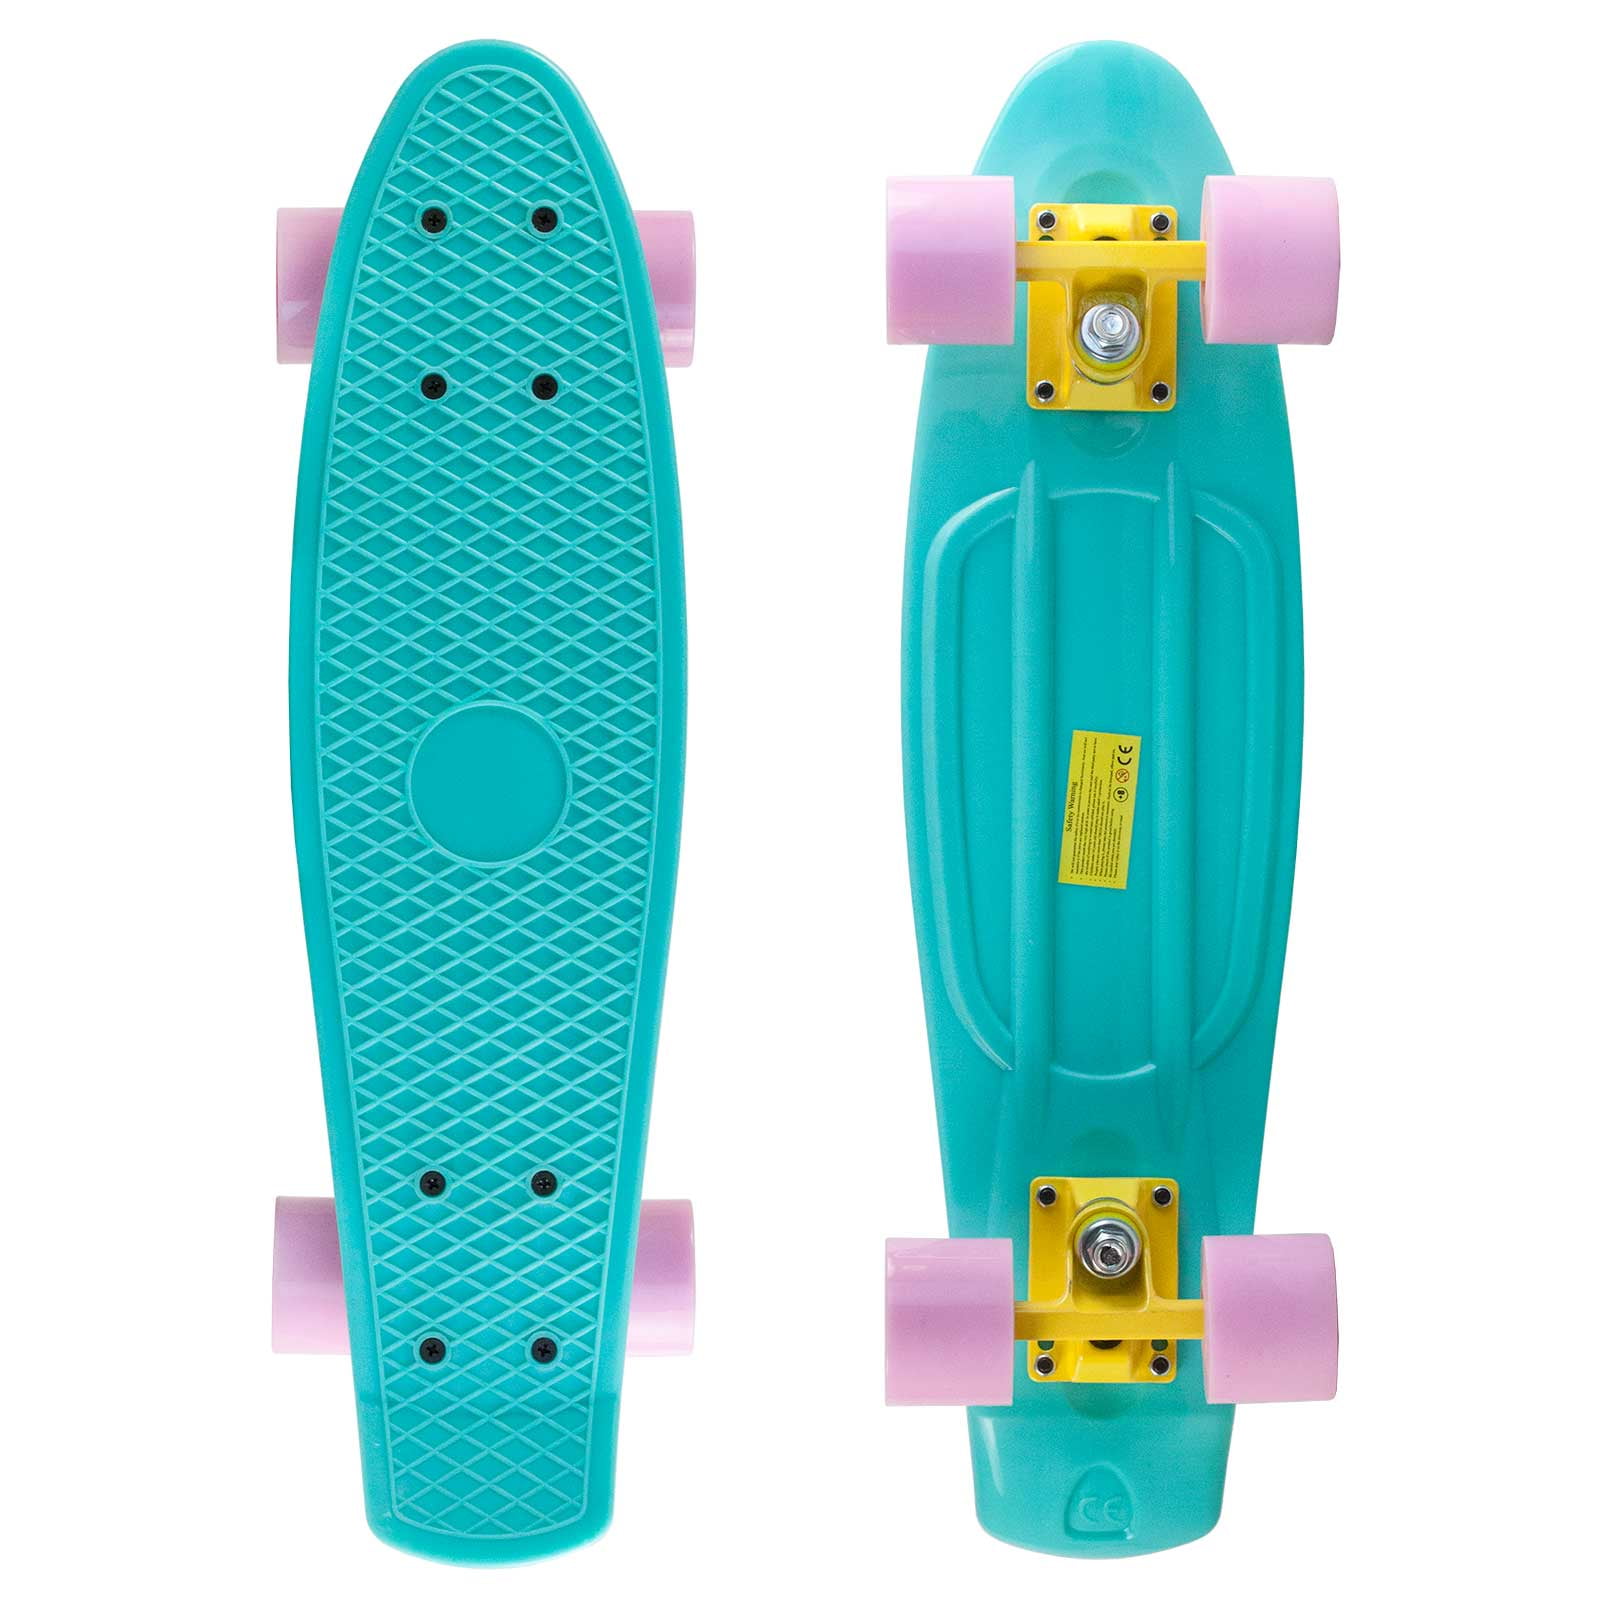 Colorful 22" Complete Skateboard Mini Cruiser Penny Style Board Gifts for Kids 